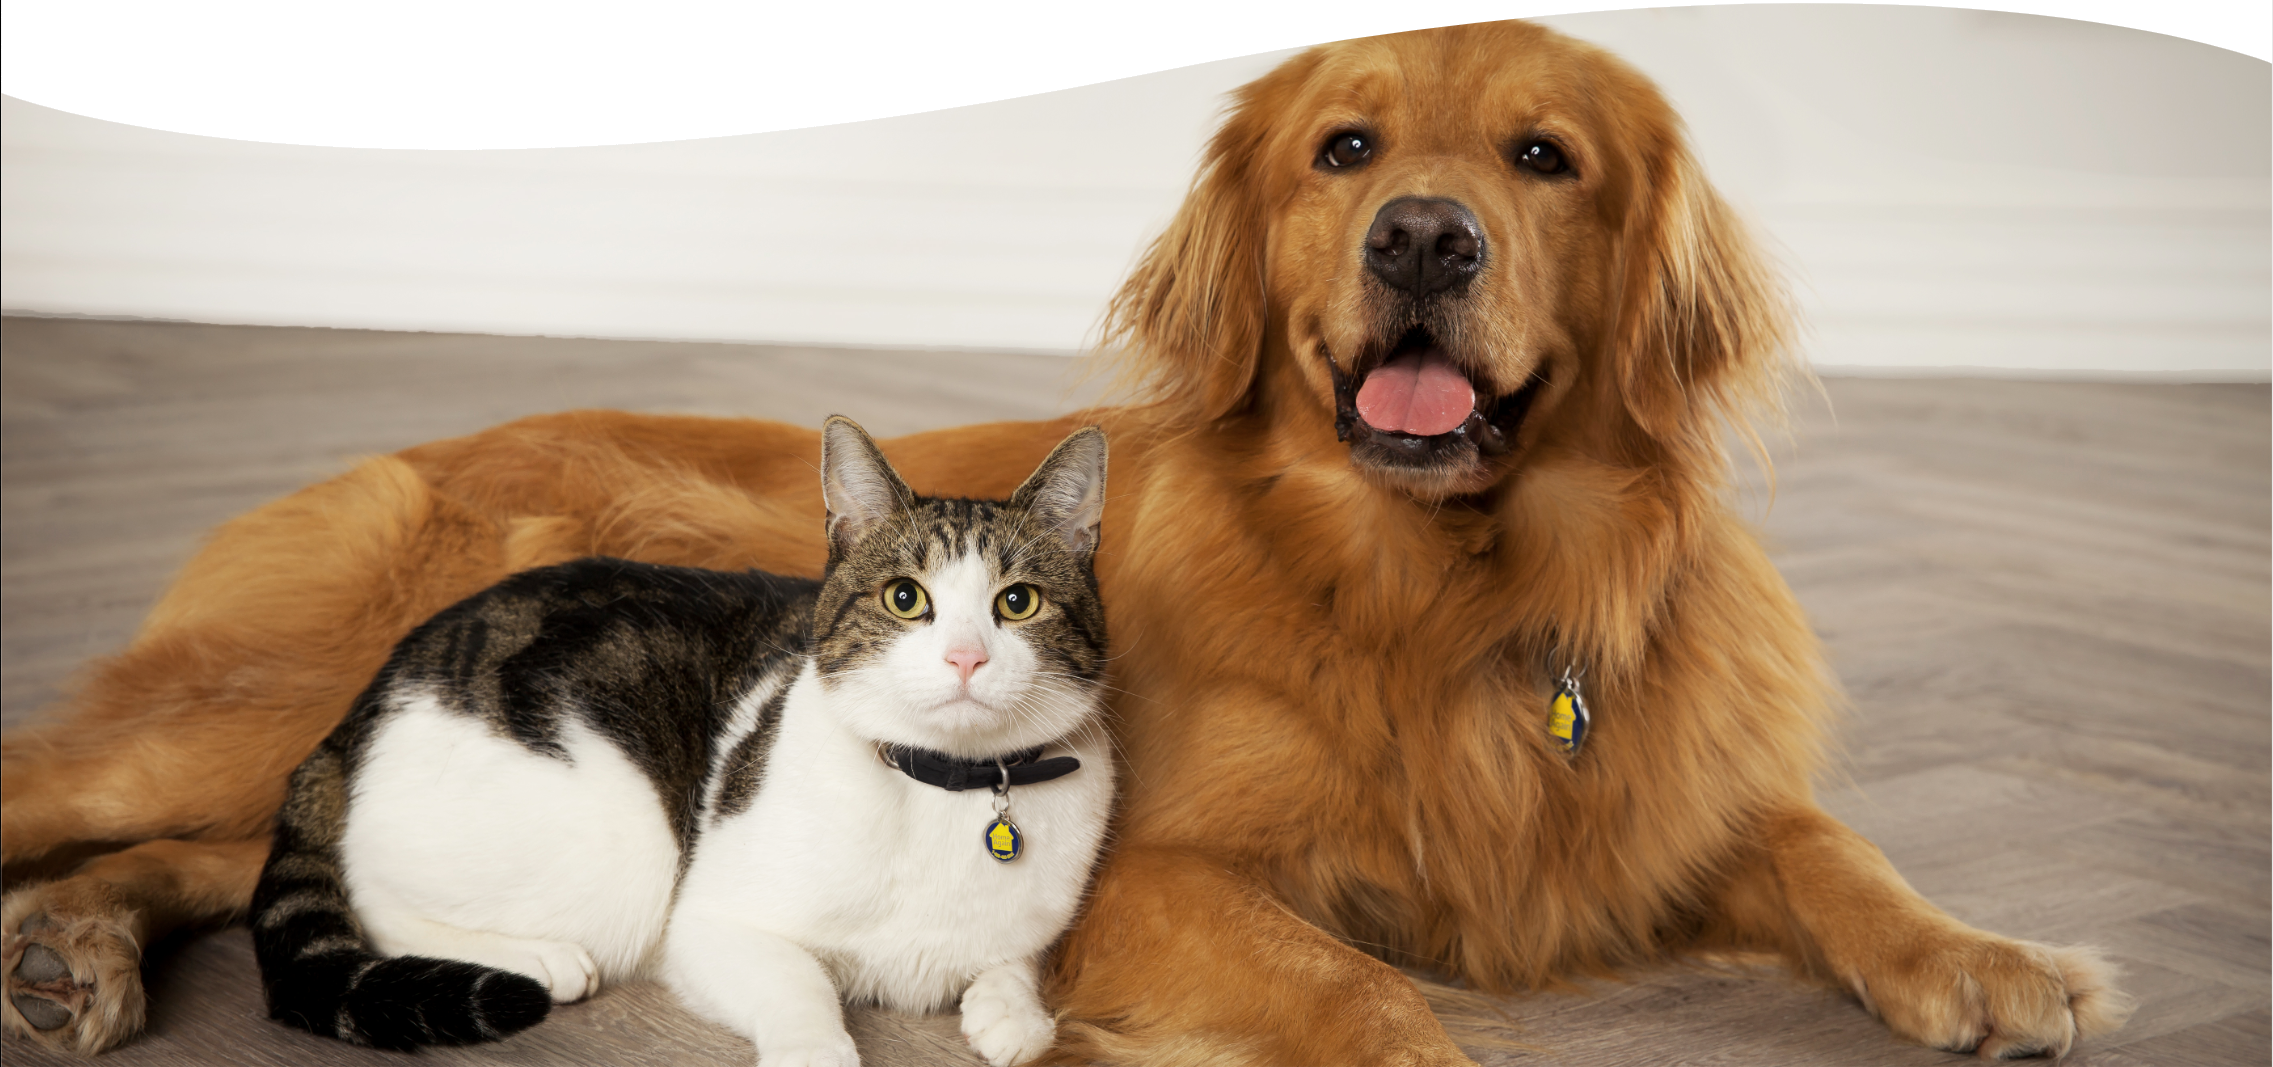 Golden retriever and cat laying next to each other.